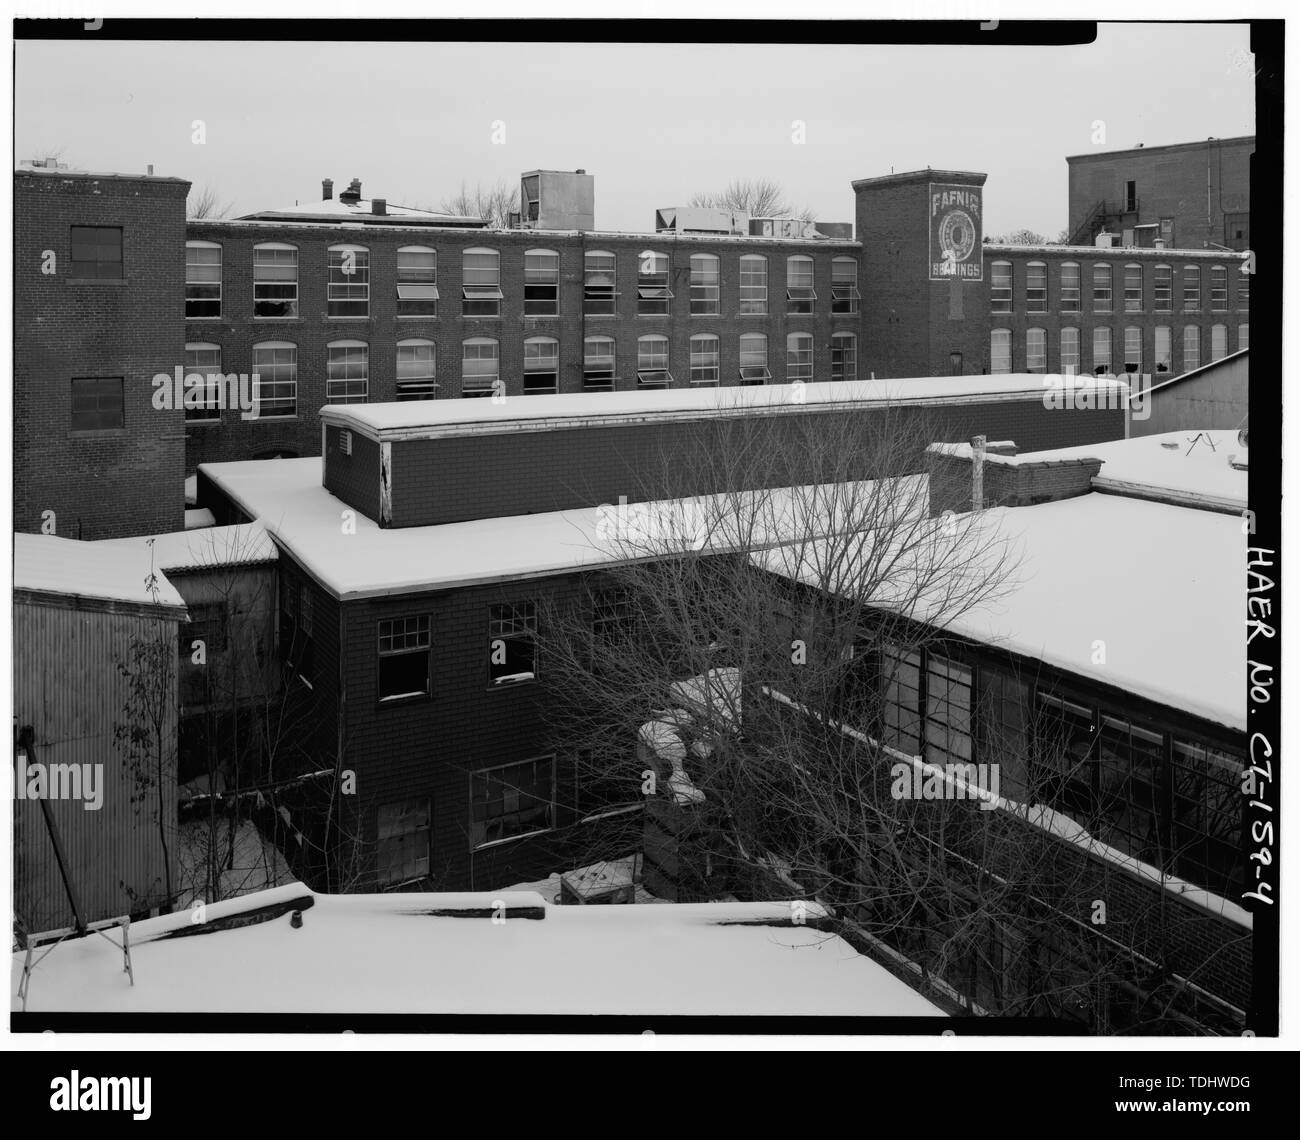 OVERVIEW LOOKING NORTHEAST, BLD 5 RIGHT FOREGROUND, BLDG. 44-16 LEFT FOREGROUND. - Fafnir Bearing Plant, Bounded on North side by Myrtle Street, on South side by Orange Street, on East side by Booth Street and on West side by Grove Street, New Britain, Hartford County, CT Stock Photo